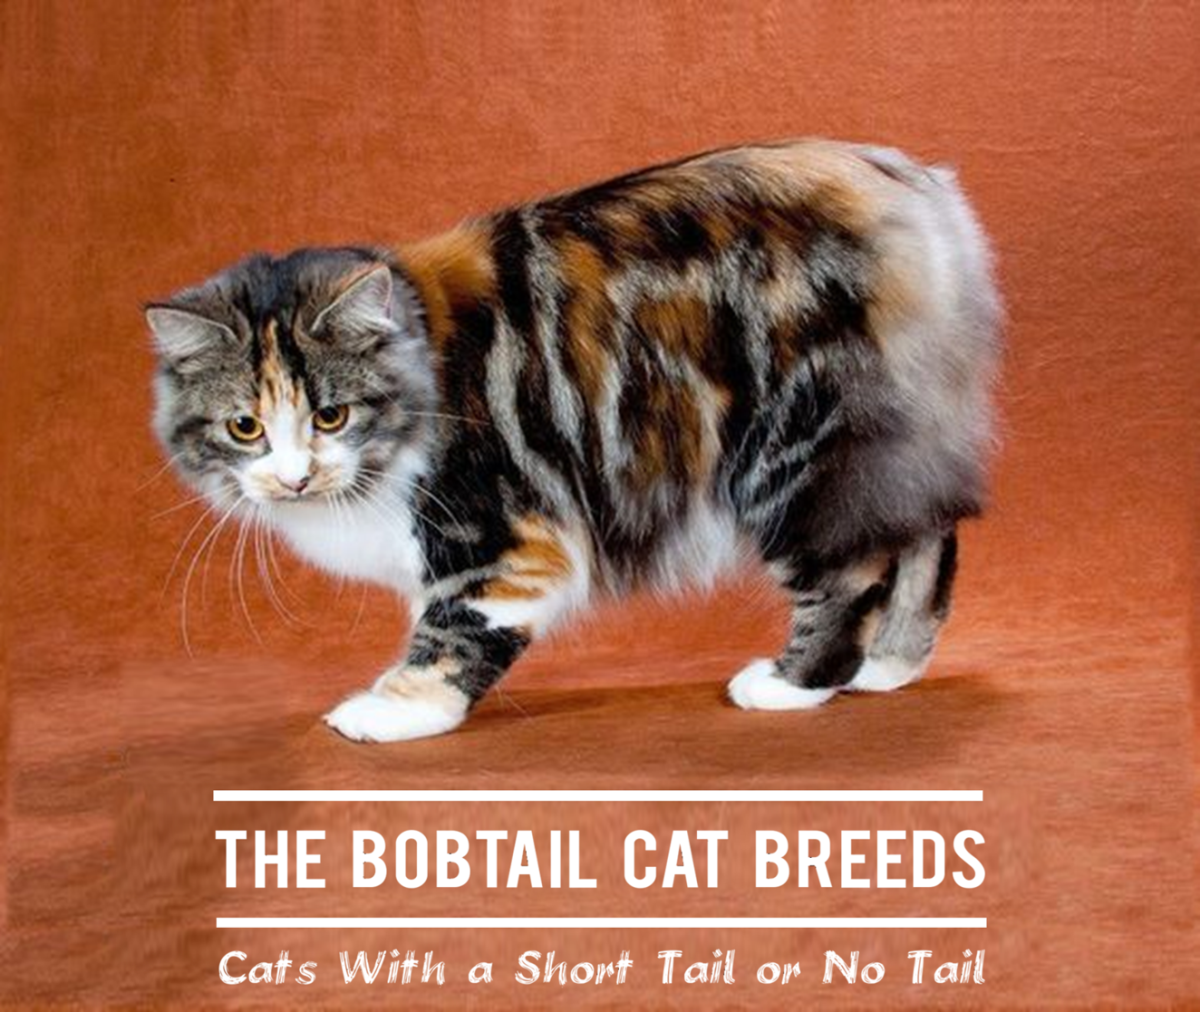 11 Bobtail Cat Breeds: The Cats With a Short Tail or No Tail